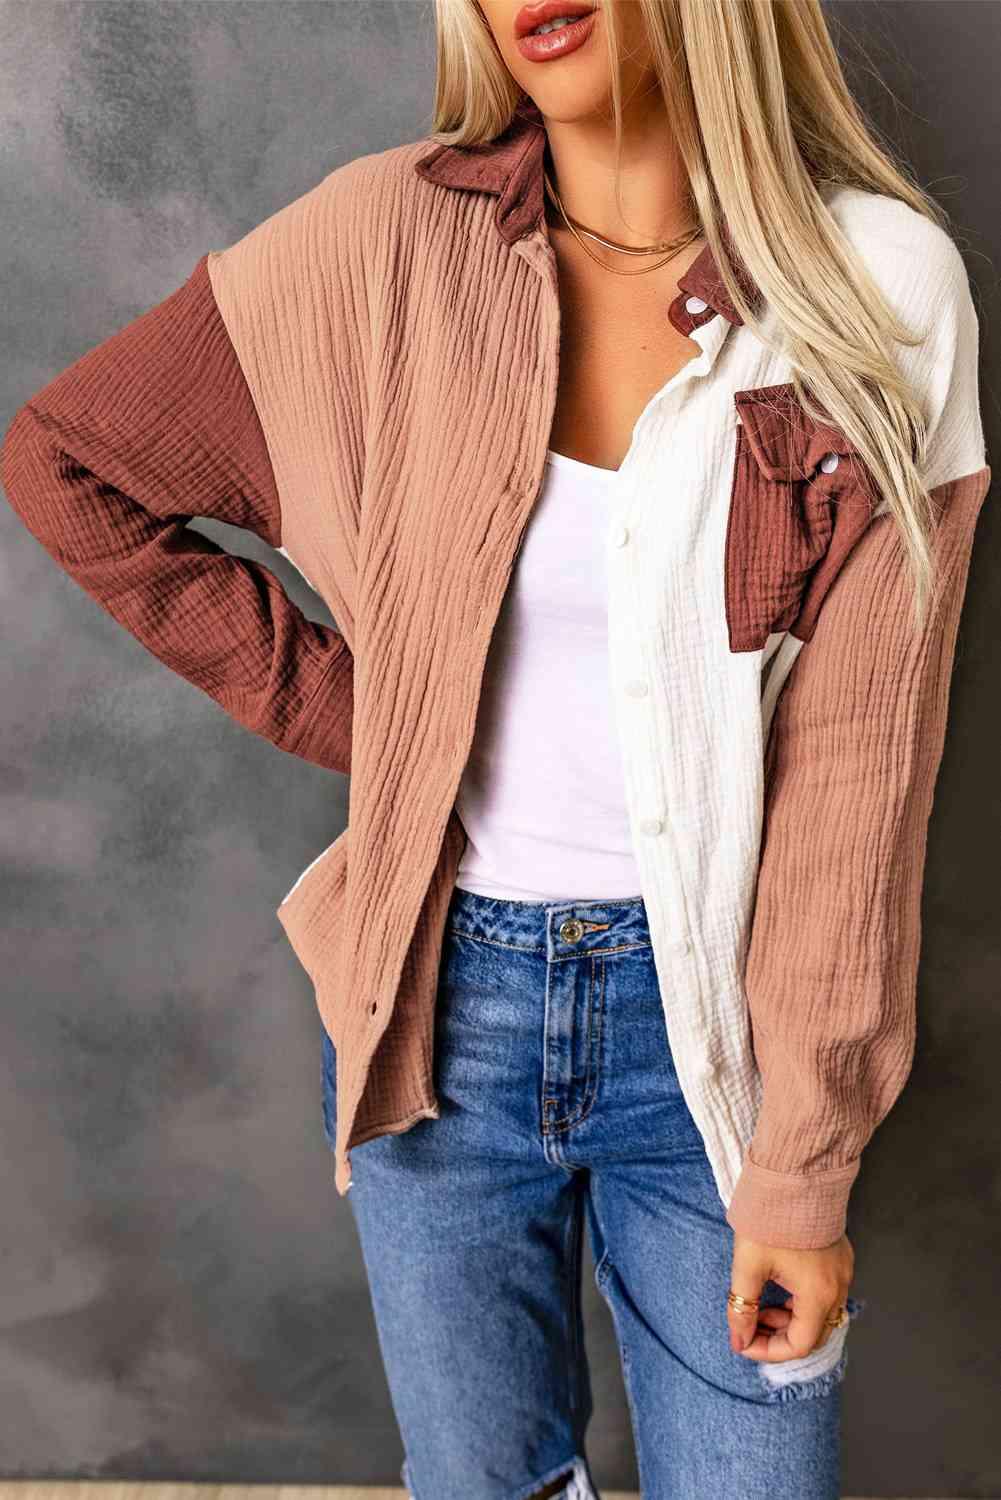 a woman wearing a brown and white jacket